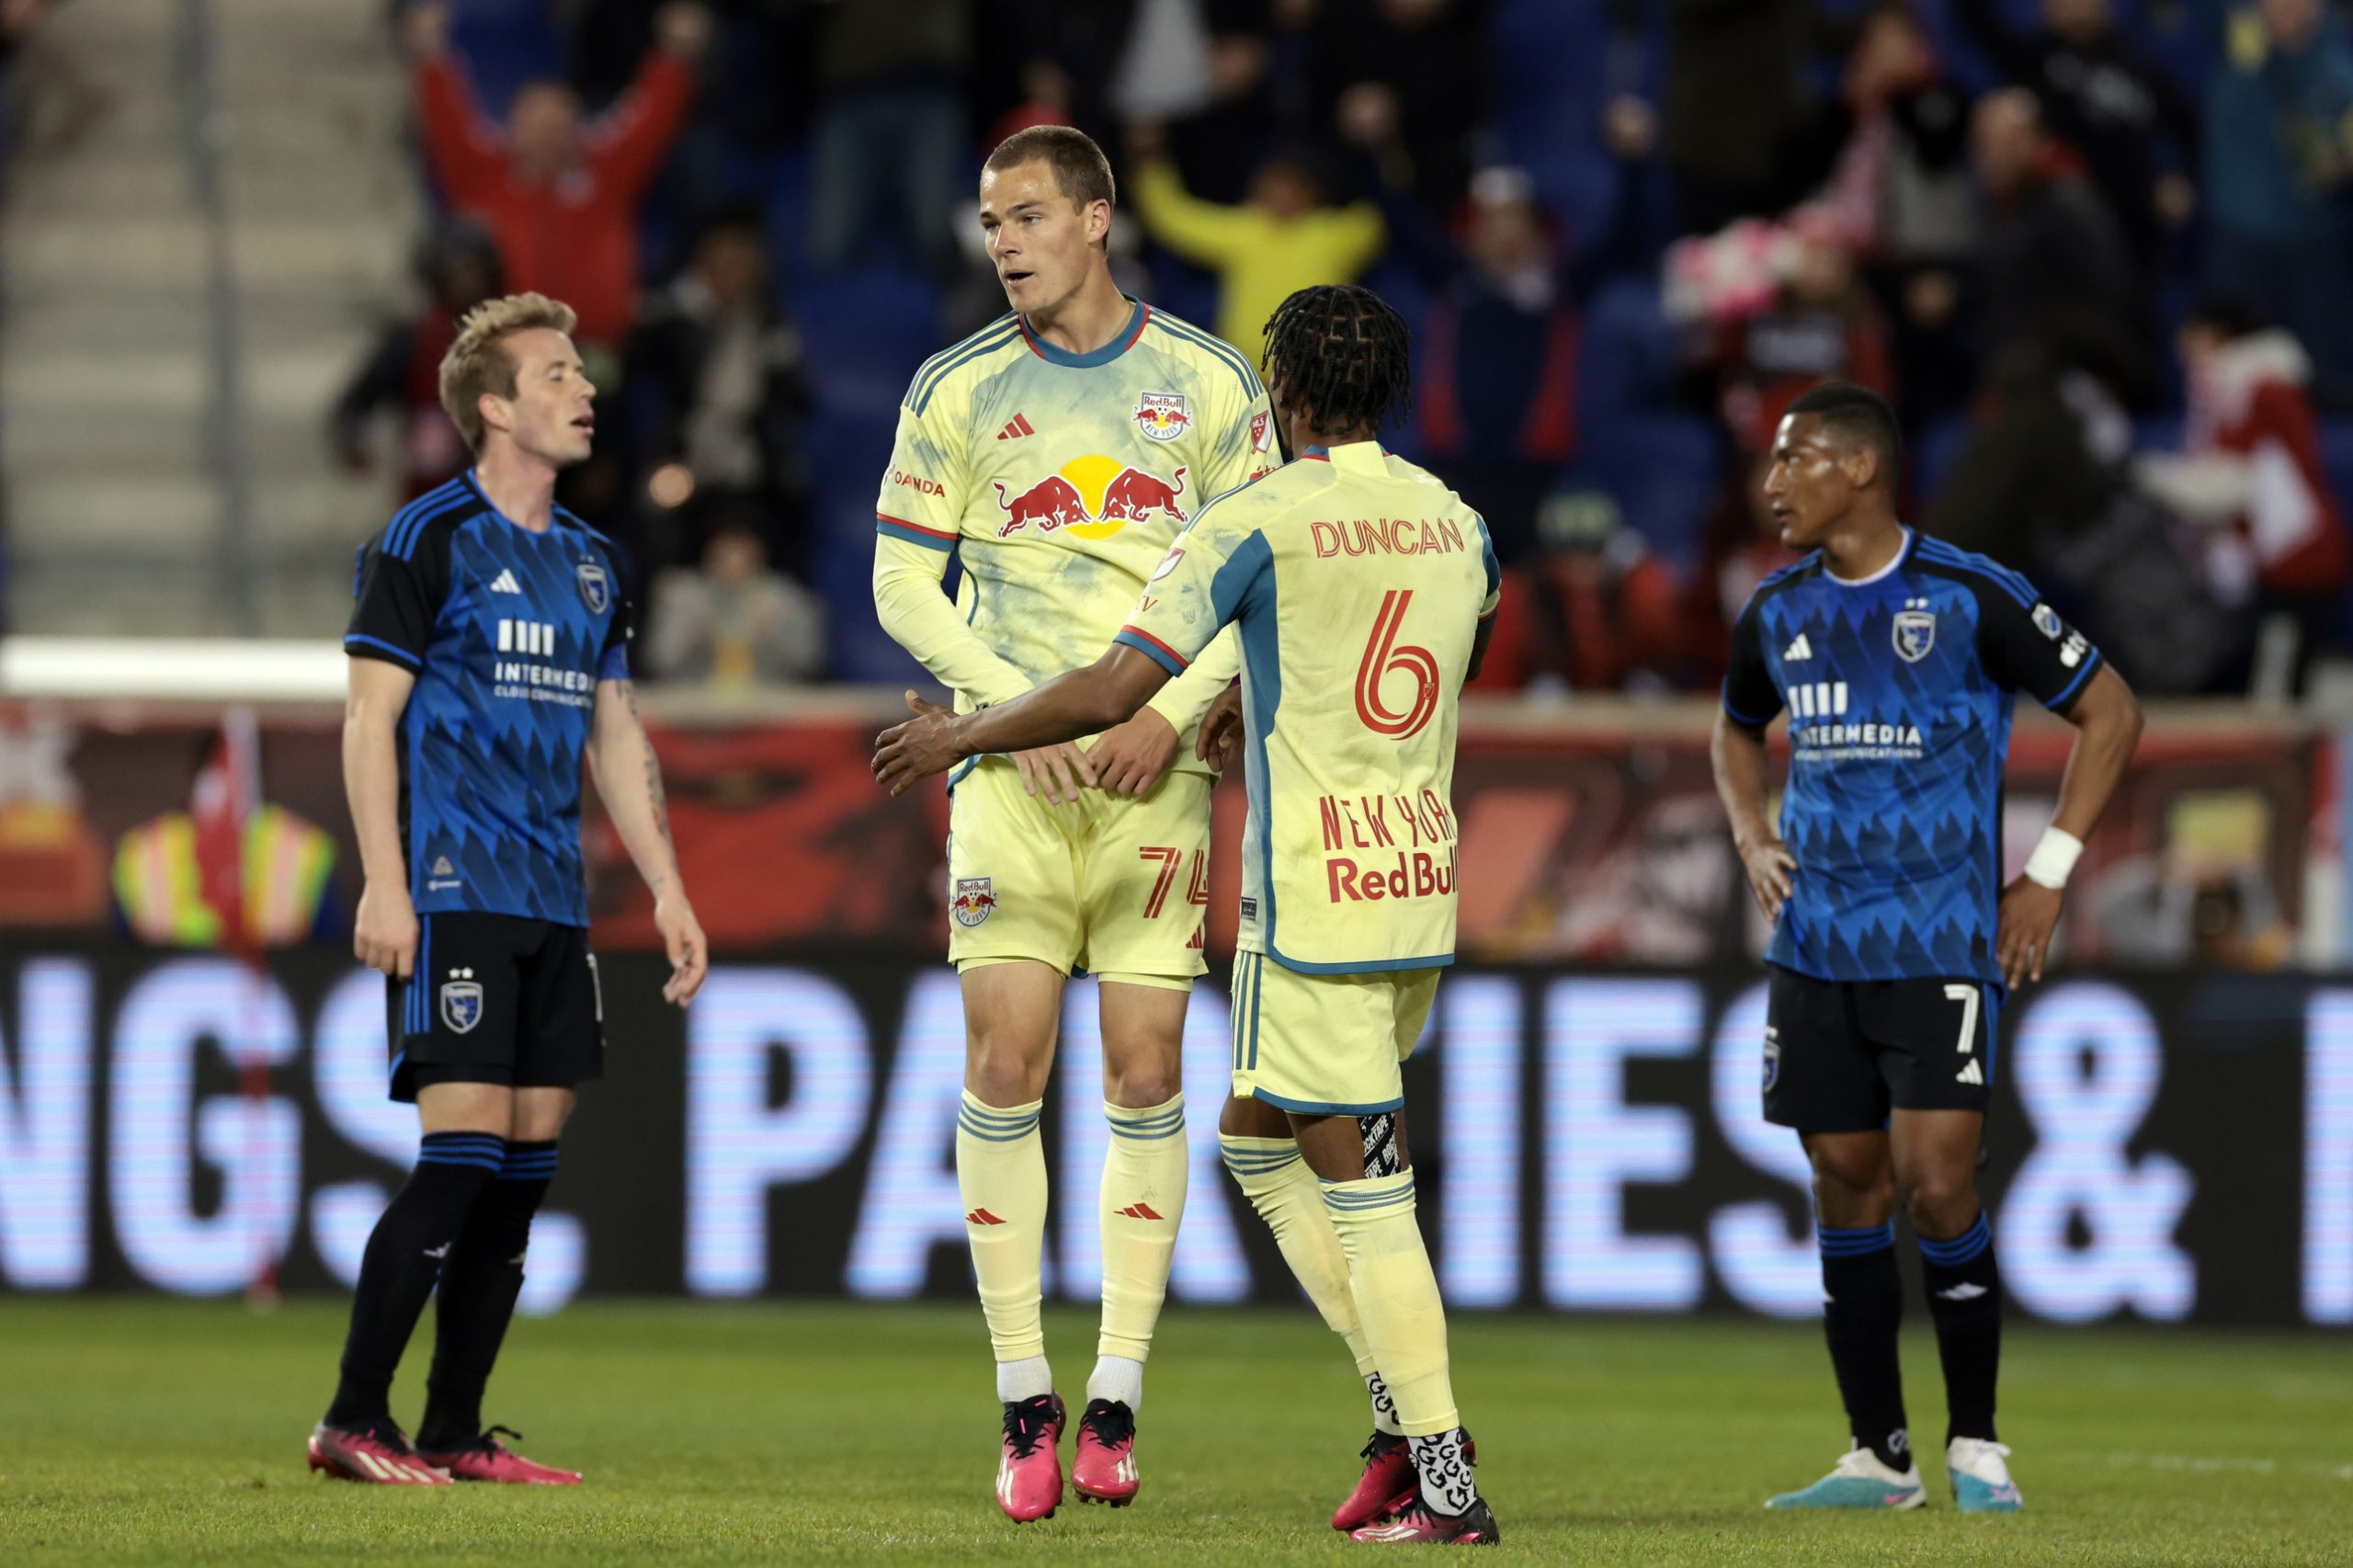 MLS: San Jose Earthquakes at New York Red Bulls as the Red Bulls Draw Against Earthquakes